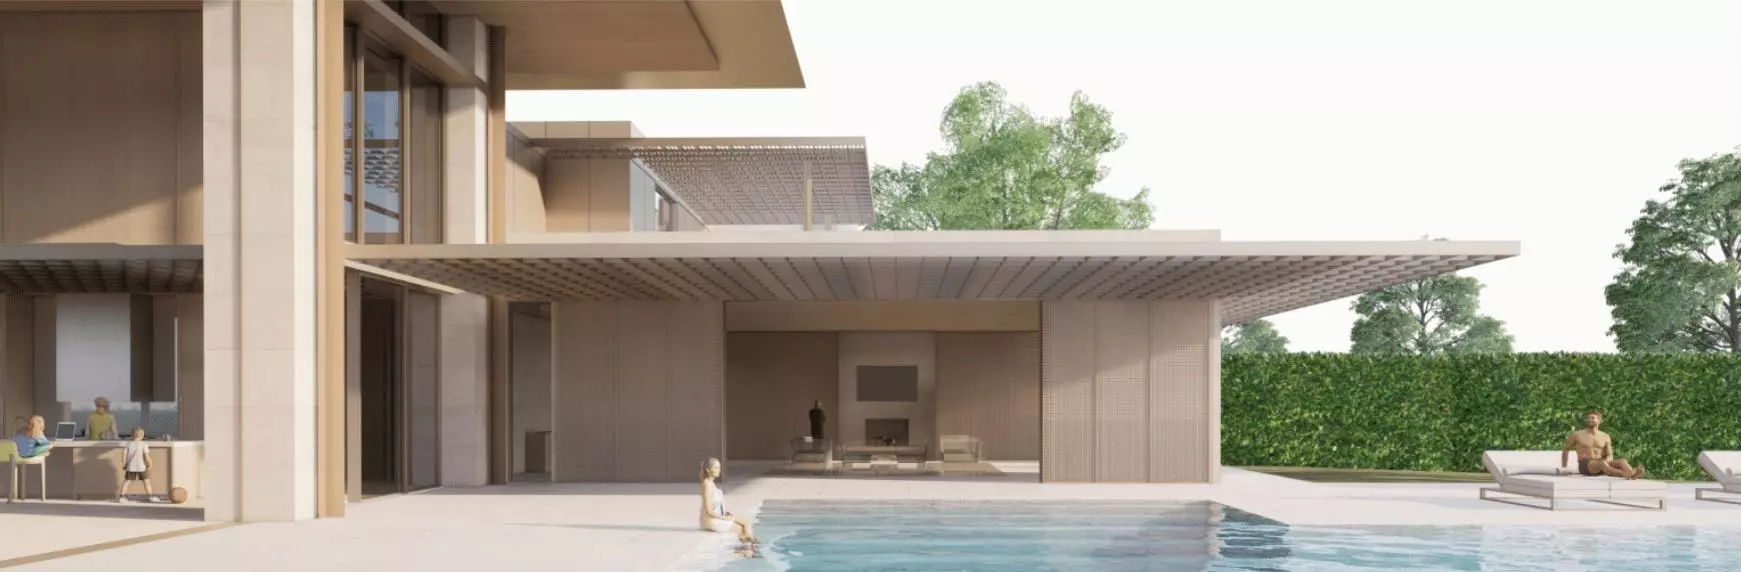 A view to the south from the pool deck shows some of the architecture proposed for the house at 60 Blossom Way.